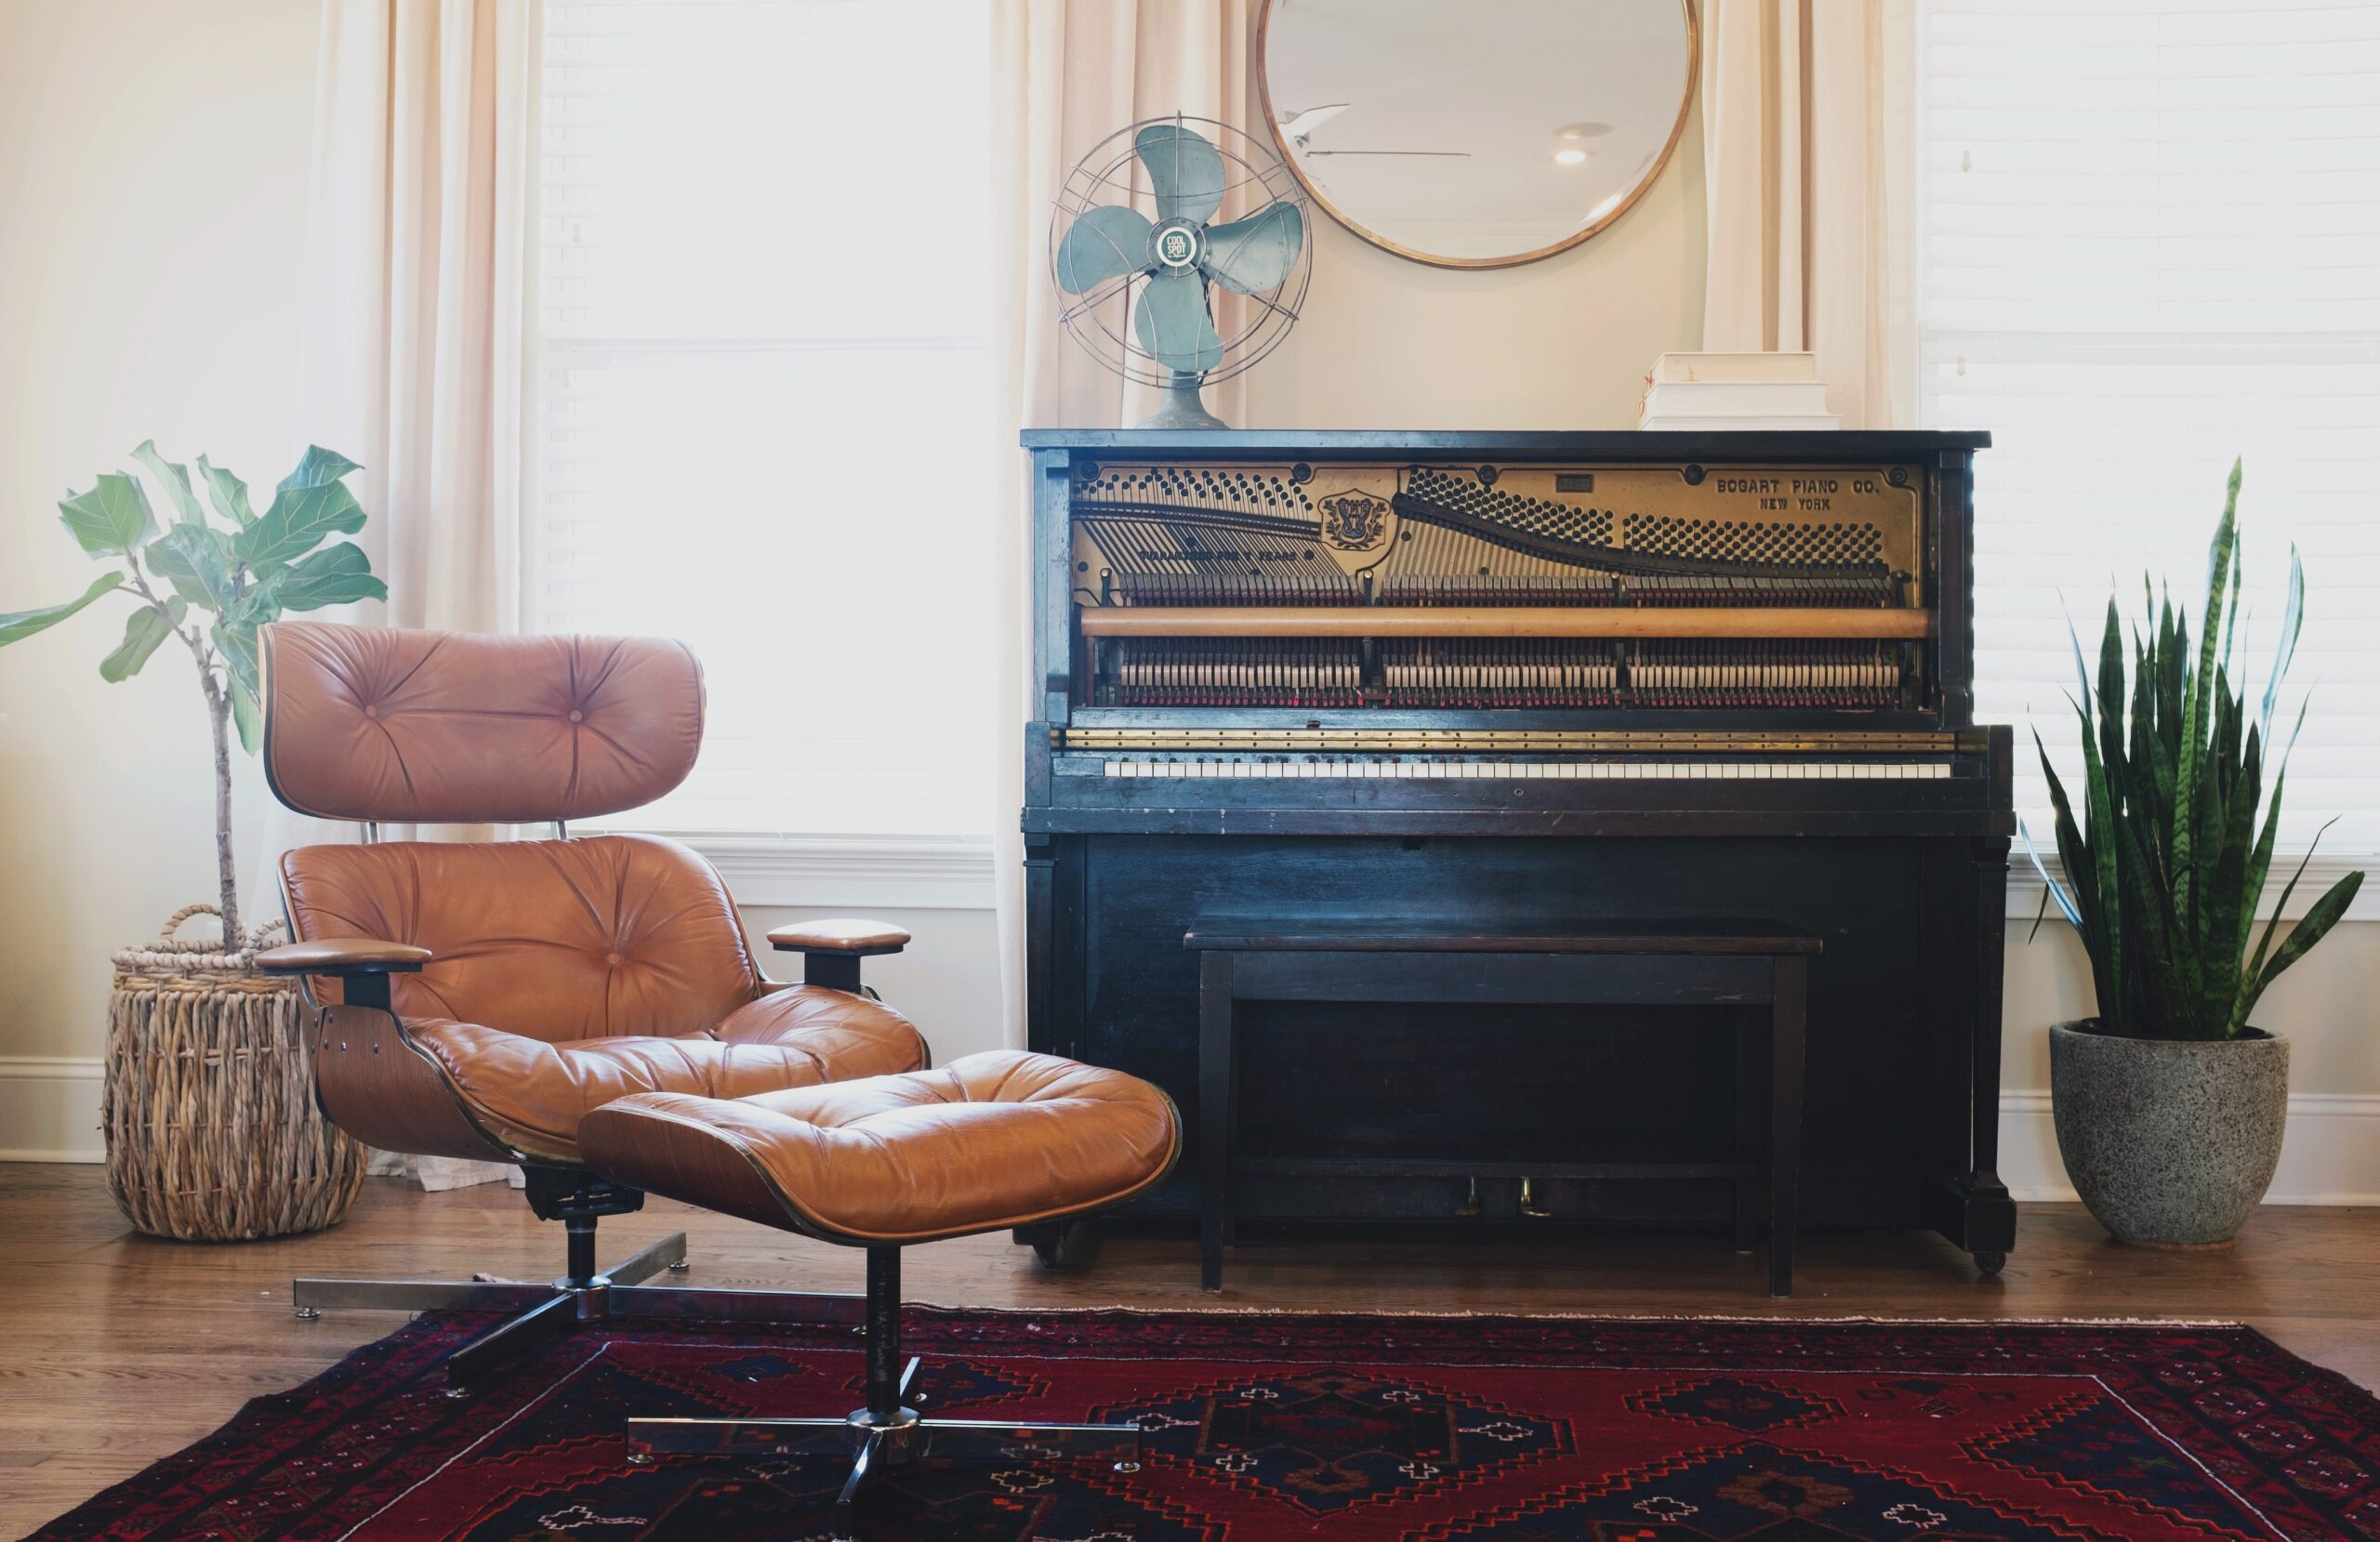 Add vintage pieces to your home for the perfect boho aesthetic. Pictured: A home with a chair, a vintage rug and a piano.